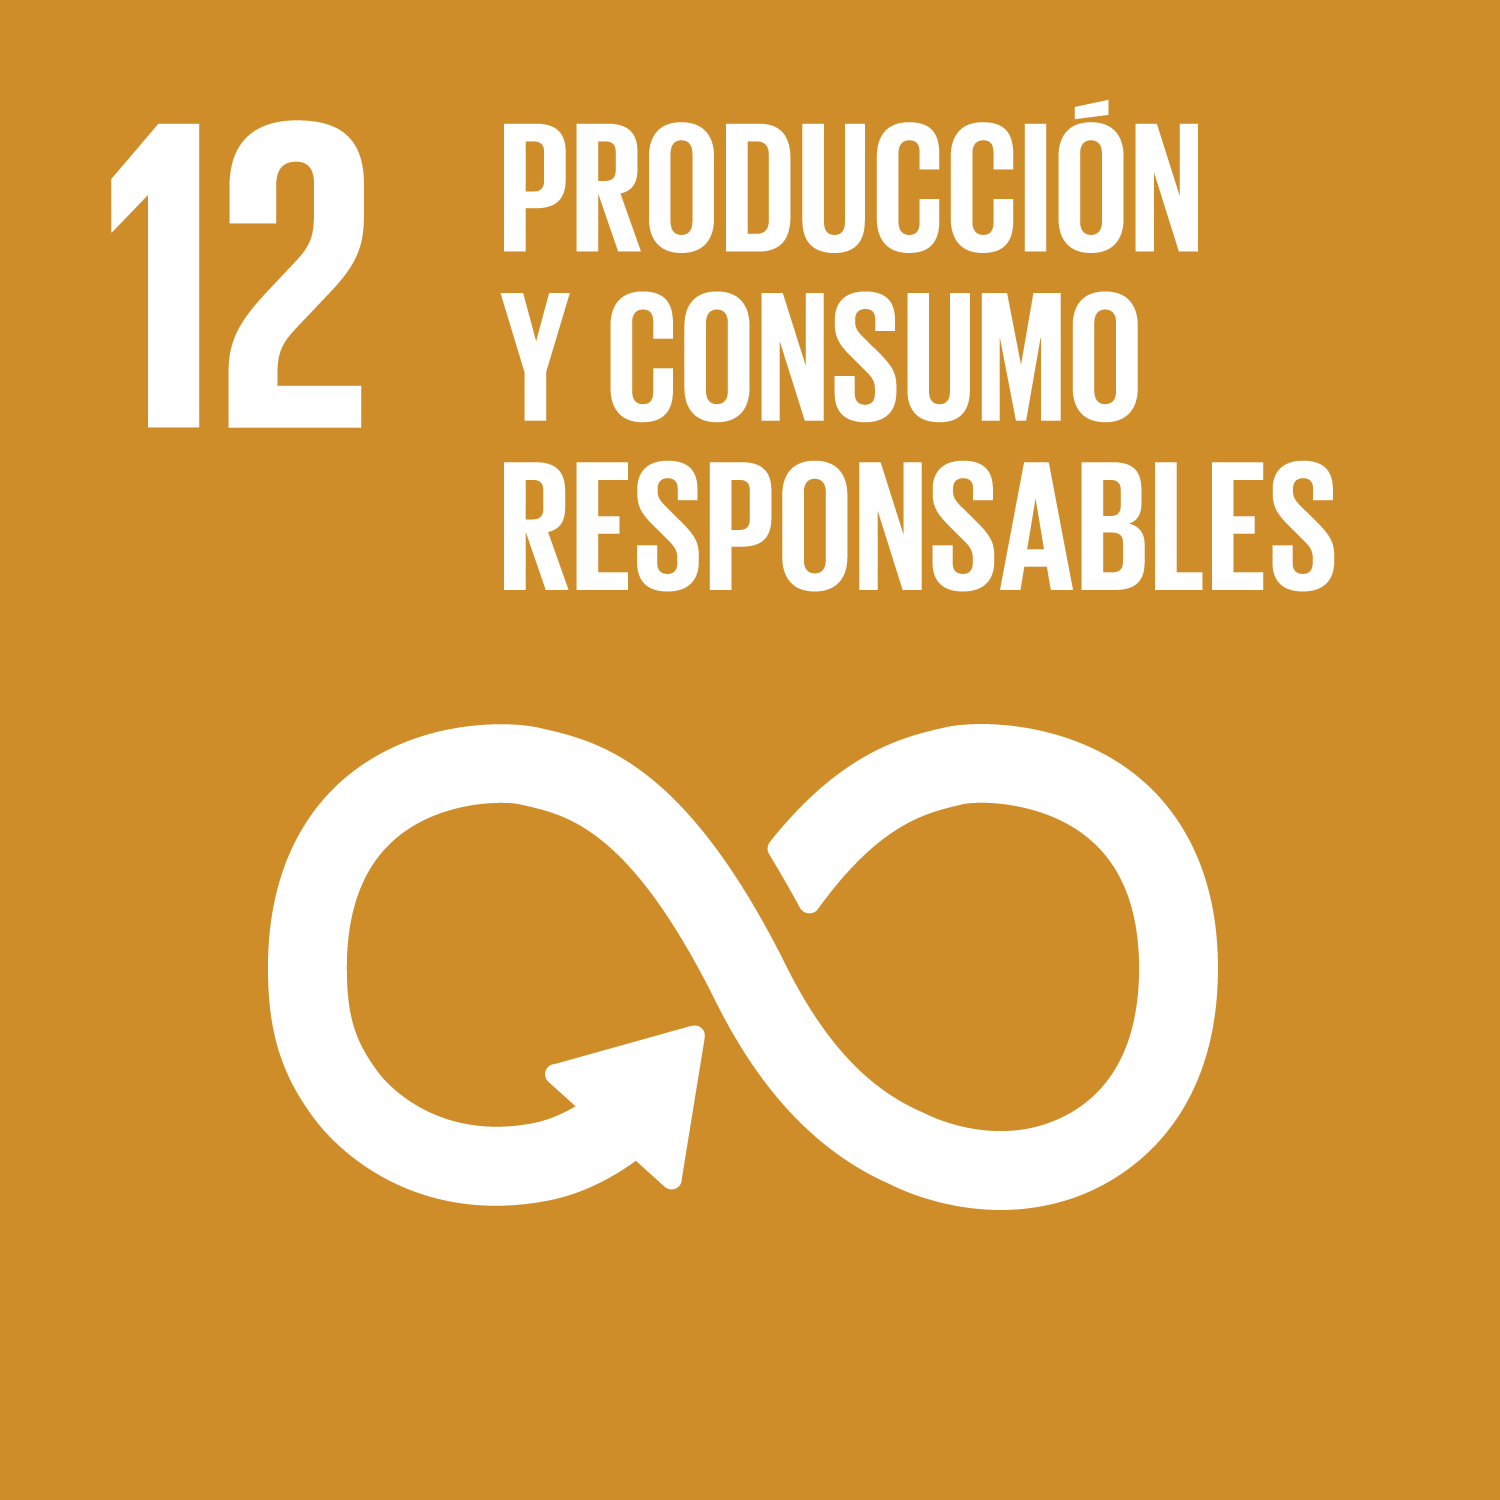 Responsible Production and Consumption